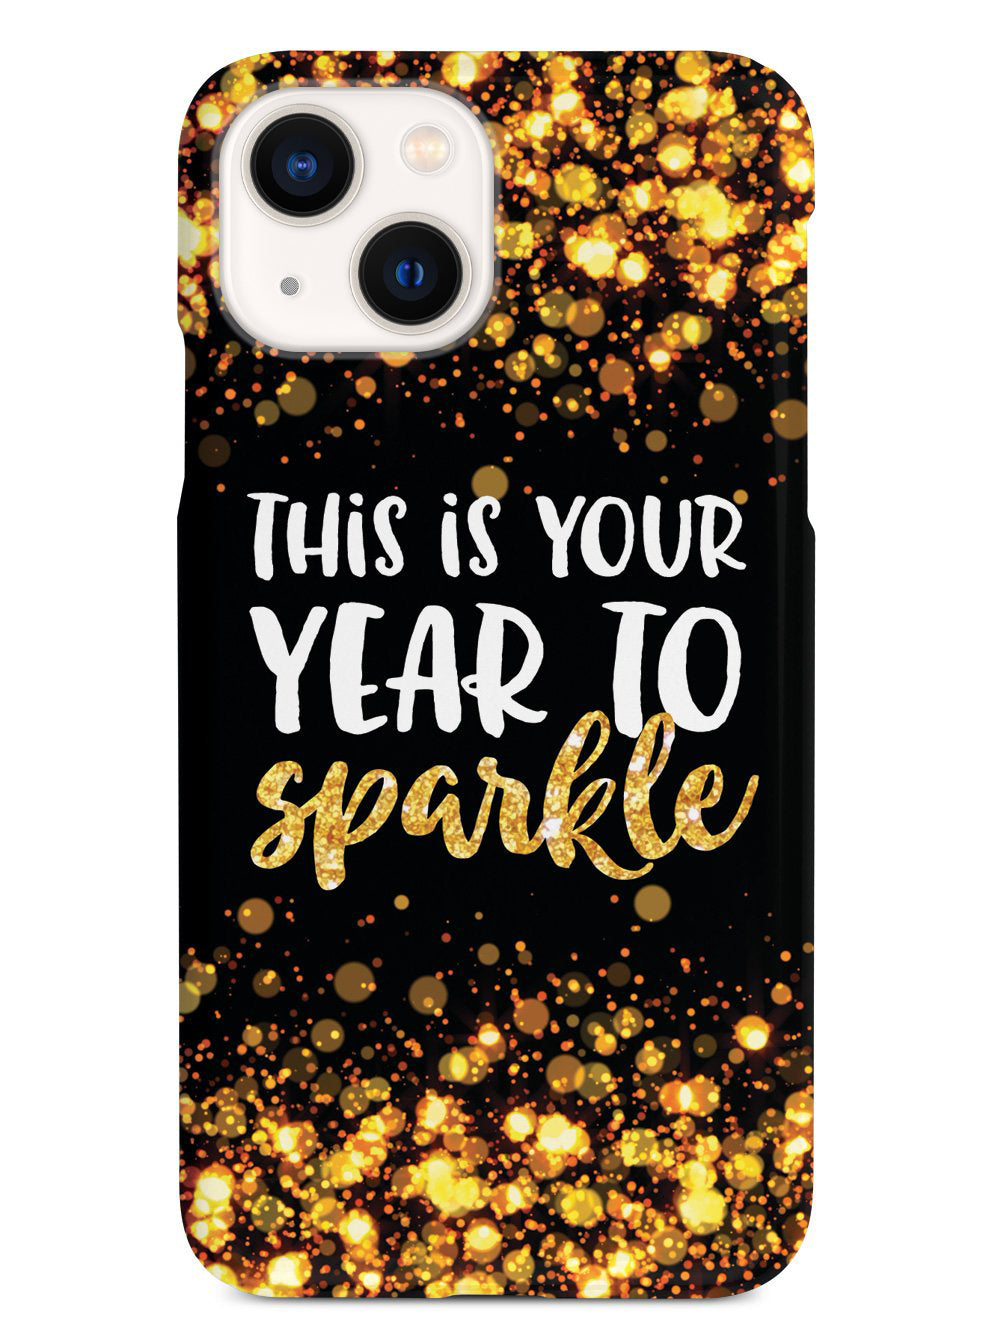 This is your Year to Sparkle - Black and Gold Case